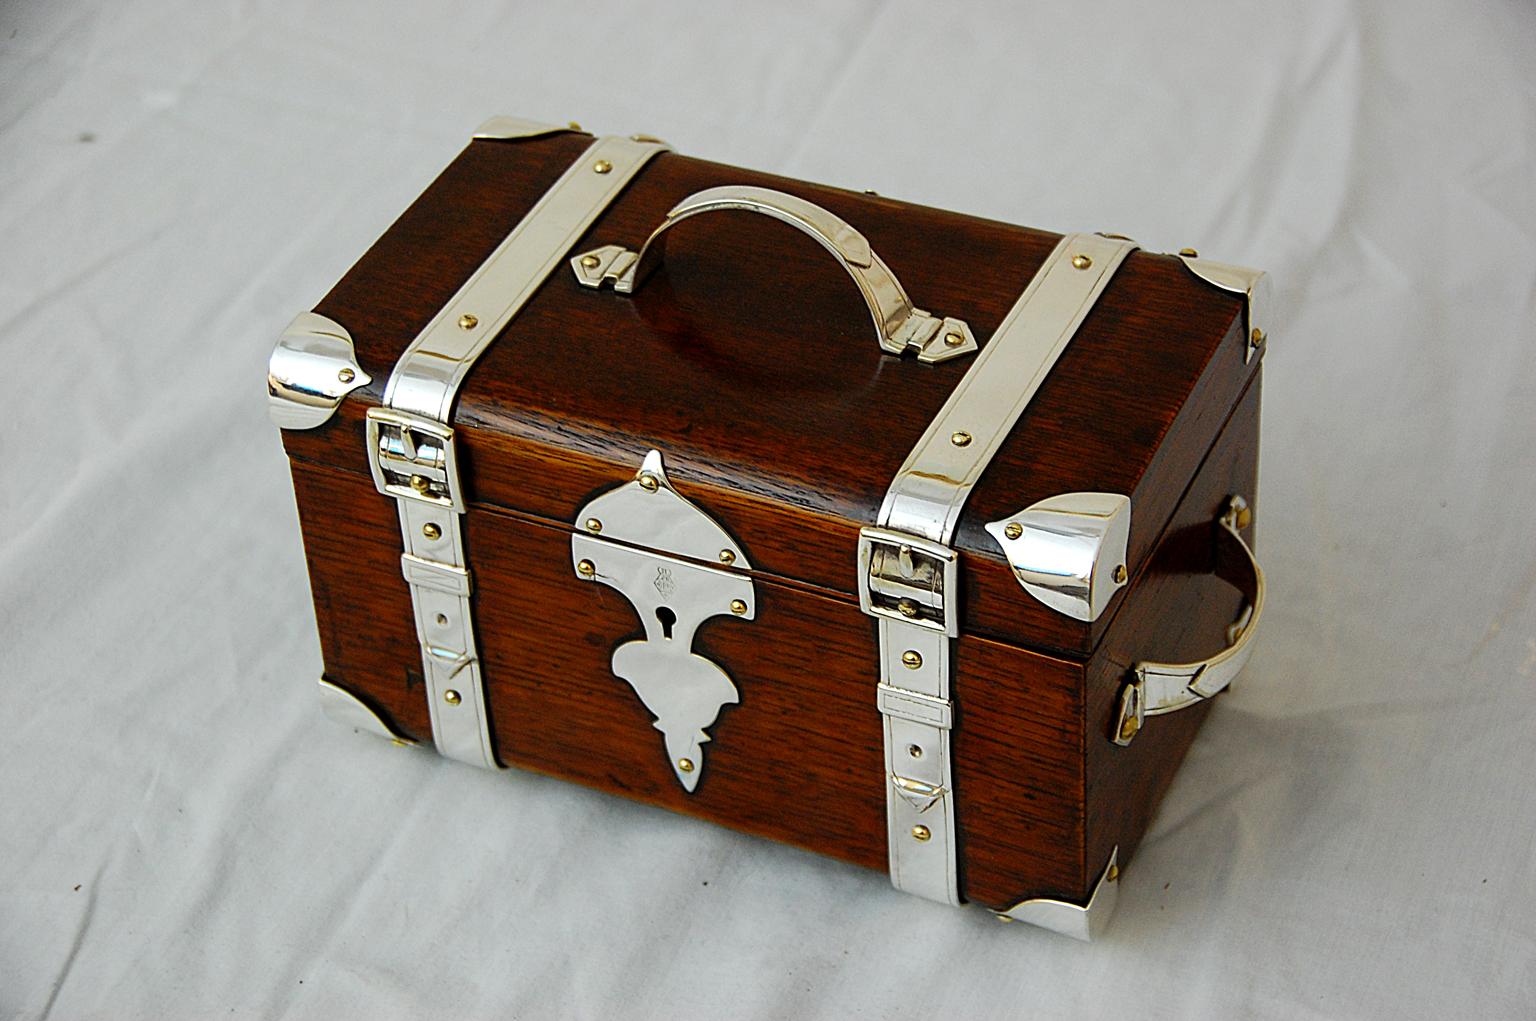 English military tobacco box in oak with silverplate corners, handles and belting. This superb quality box is registry dated 1879 and is marked with the broad arrow, which signifies an official war office purchase. The wonderful detailing of the